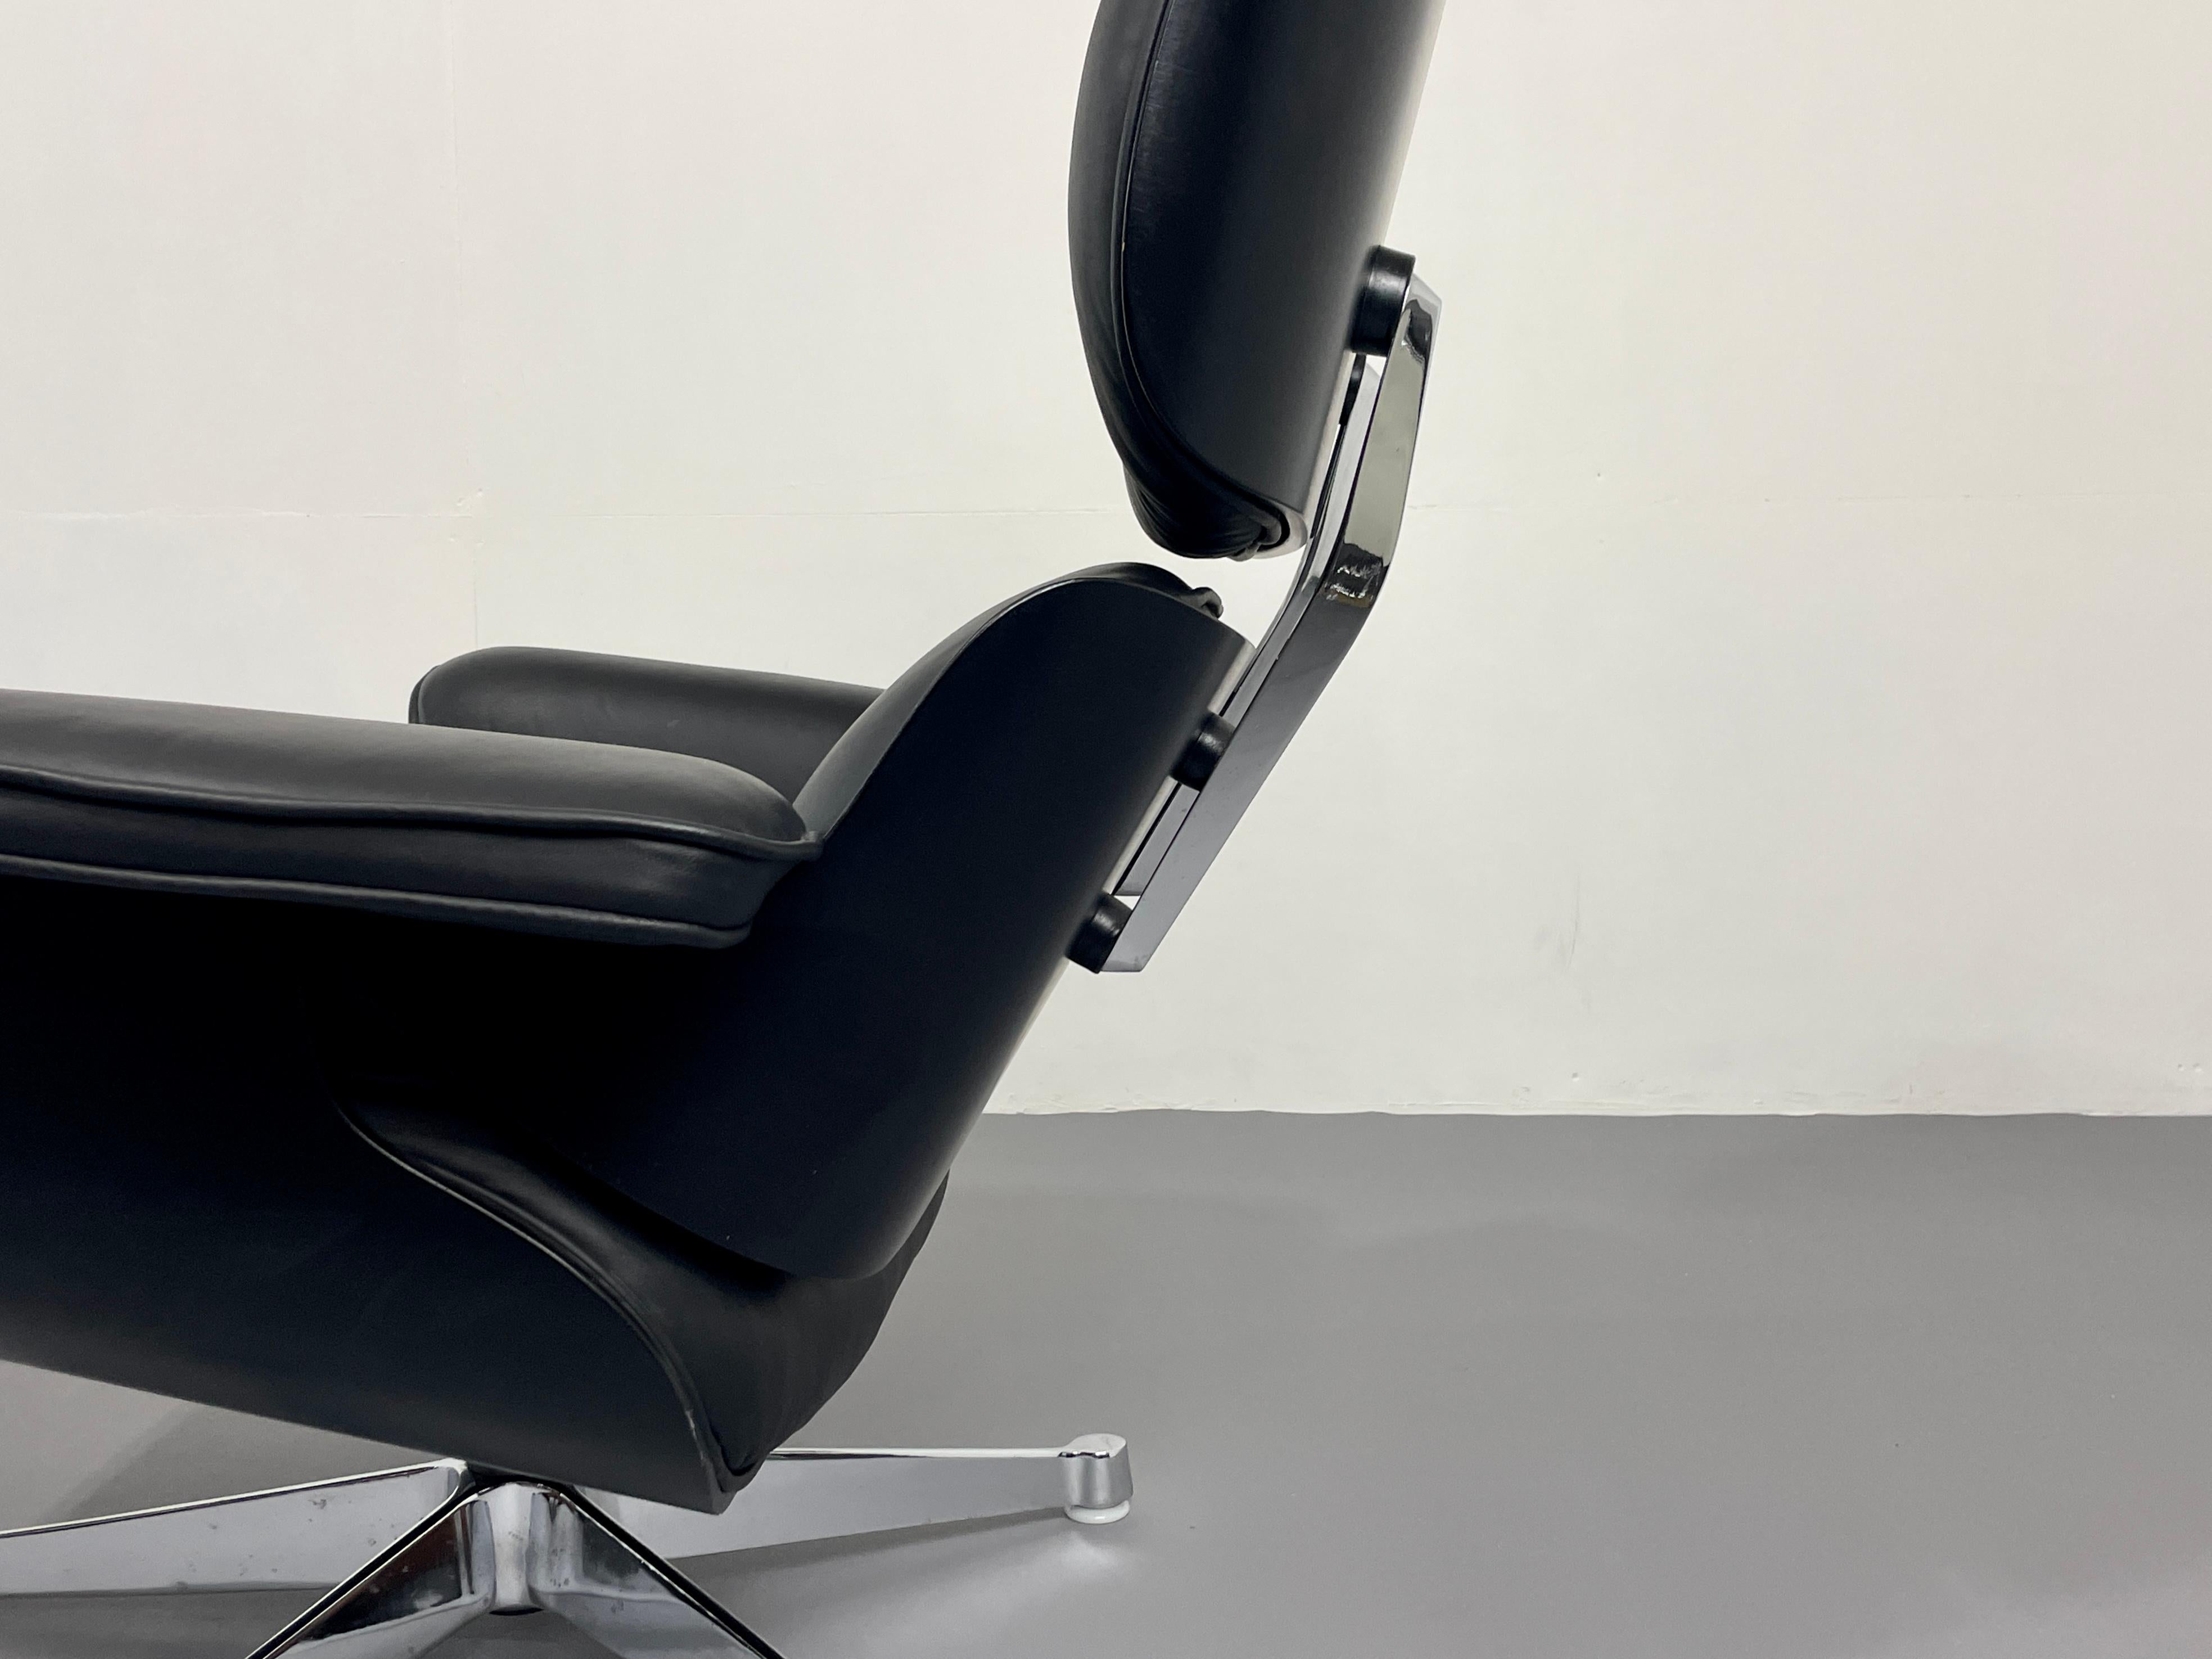 American Black vintage Herman Miller Lounge Chair with Ottoman, designed by Eames  For Sale